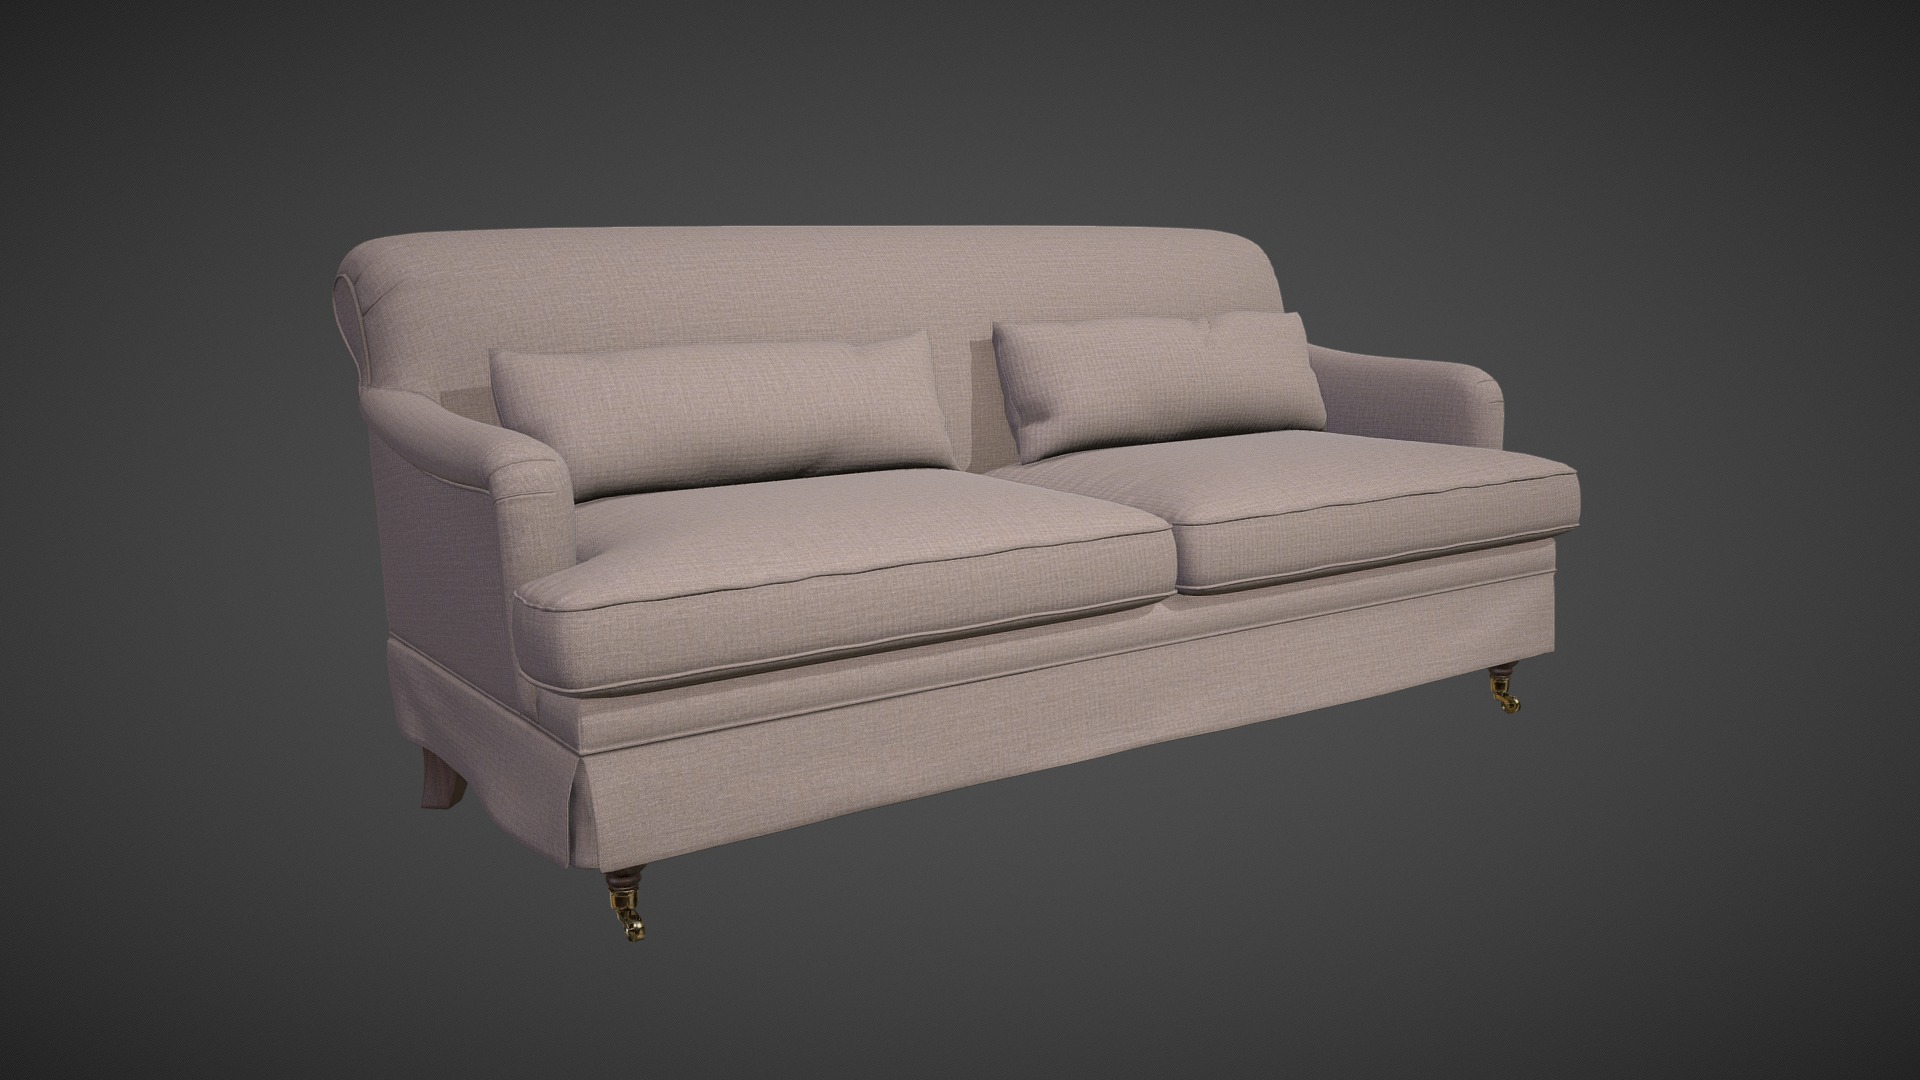 Sofa Adhara

File Units are centimeters.

The Models is already scaled to real-life dimensions and is positioned to the center of the coordinate system.

Studio Lights and the environment settings are not included.

Included maps:




Base Color

Roughness

Metallic

Normal

Ambient Occlusion

Maps resolution: 4096

In case of any questions, please contact us.

Thanks for purchasing 3d model